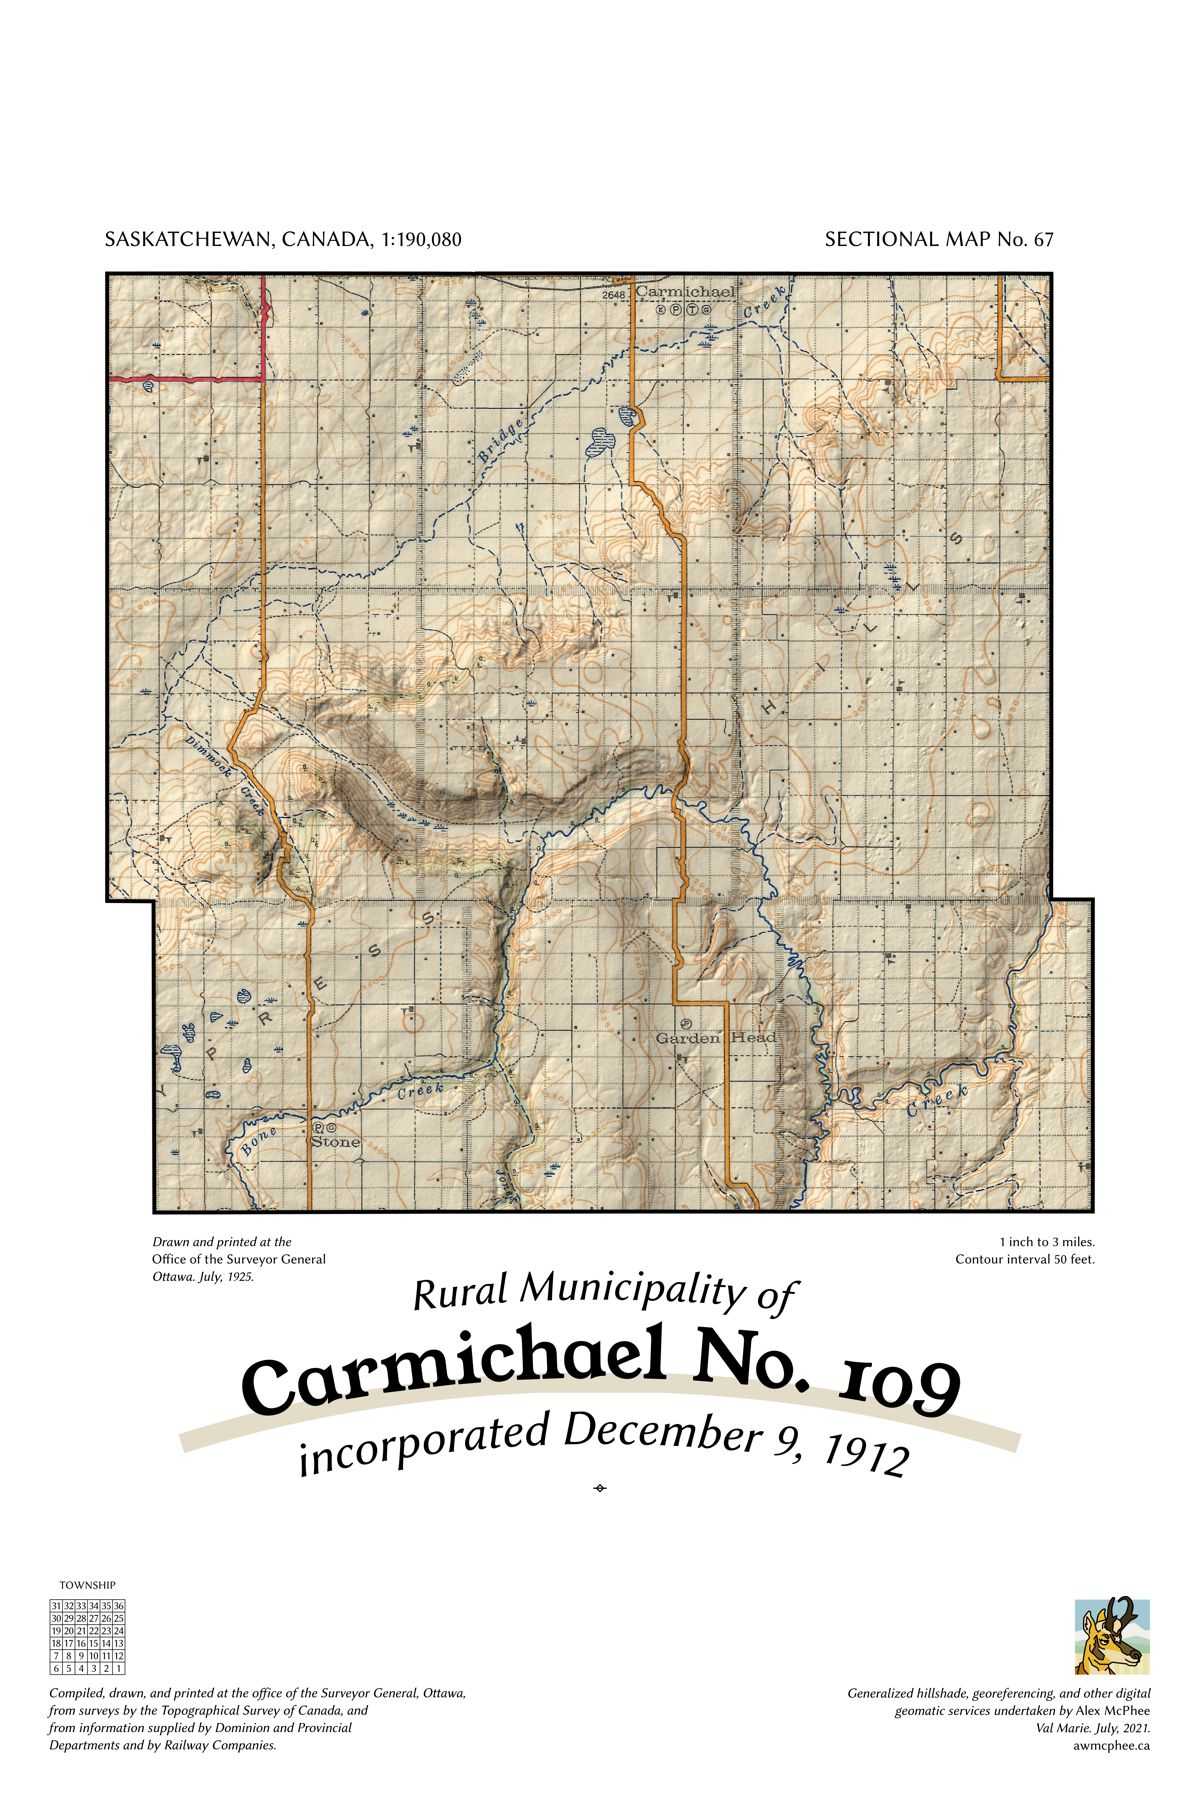 A map of the Rural Municipality of Carmichael No. 109.